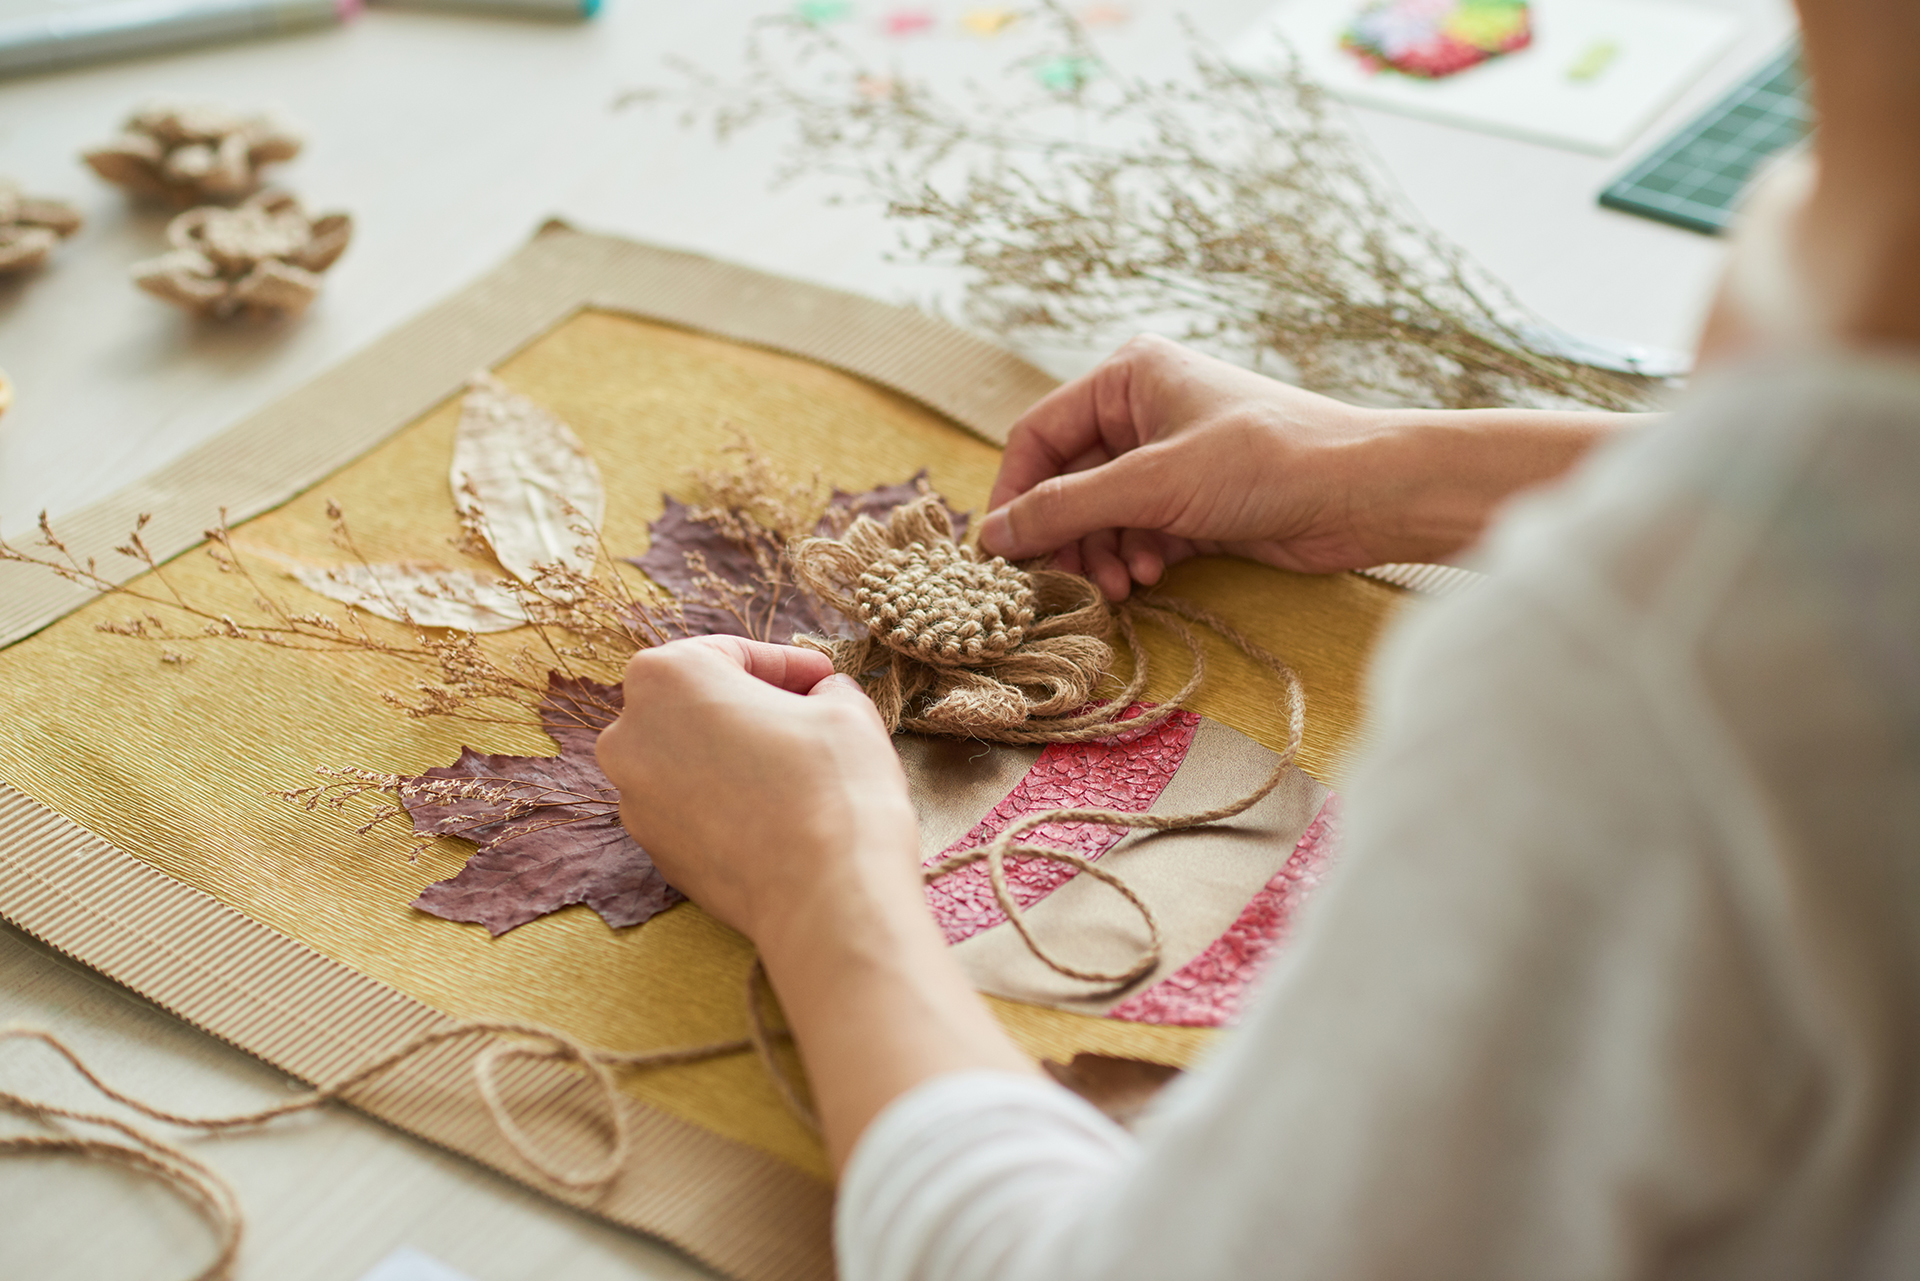 Over the shoulder image of a person constructing a collage with various elements such as yarn, dried flowers, and seed pods. 